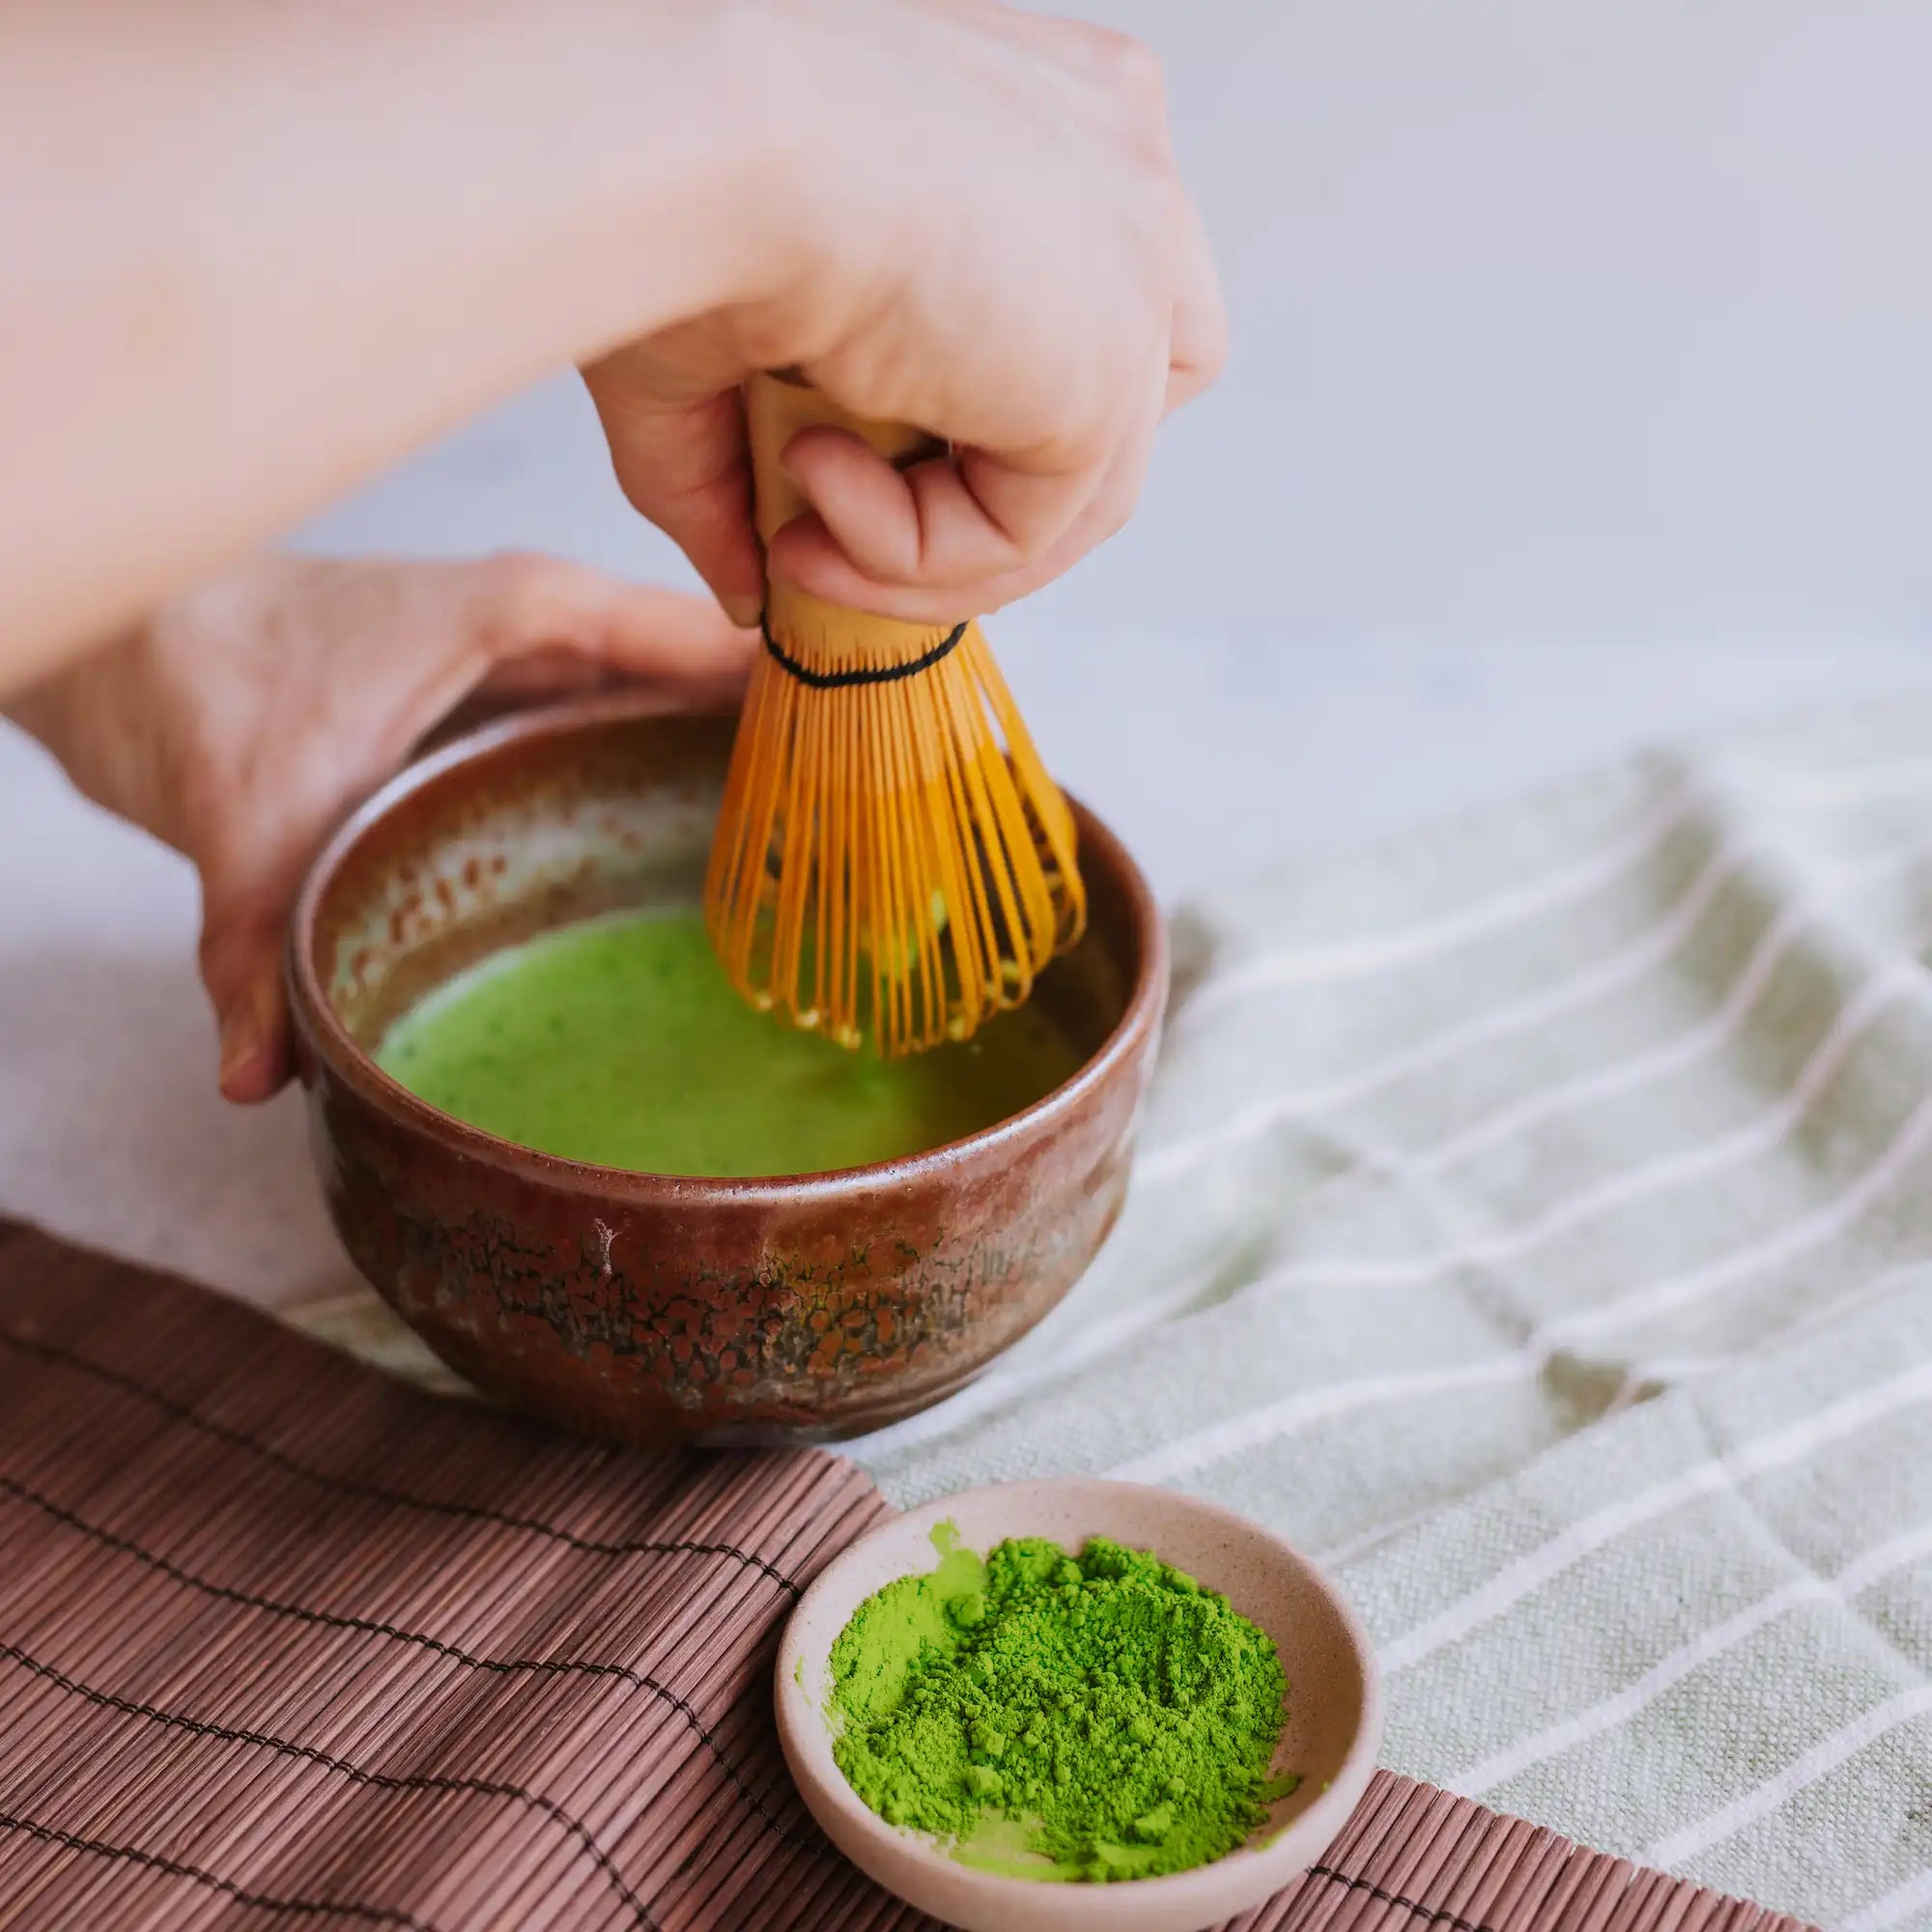 hand whisking a bowl of matcha with a bamboo whisk and a dish of matcha powder in the foreground